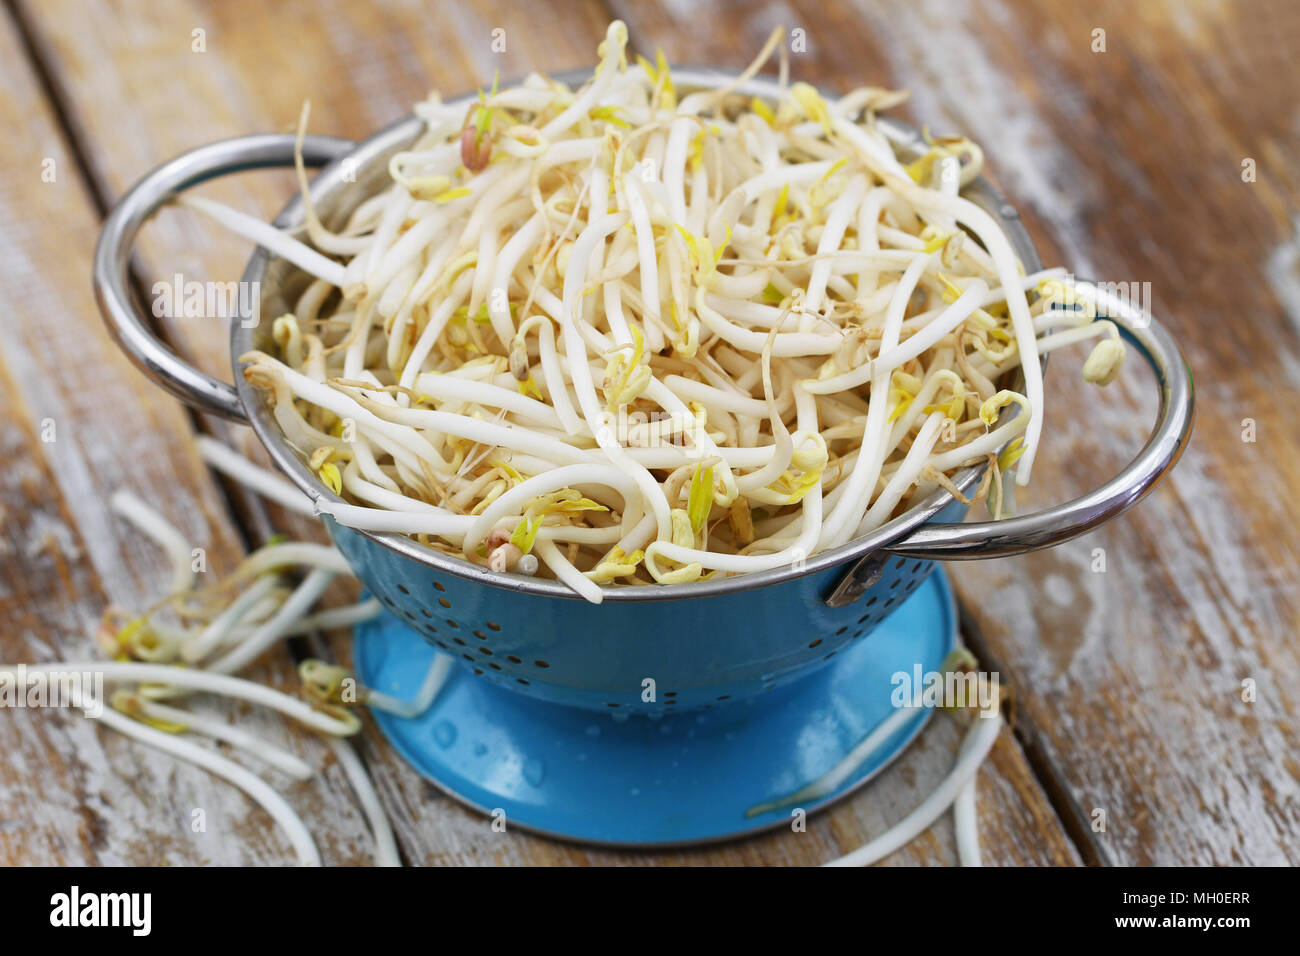 Fresh beansprouts in blue colander on rustic wooden surface Stock Photo